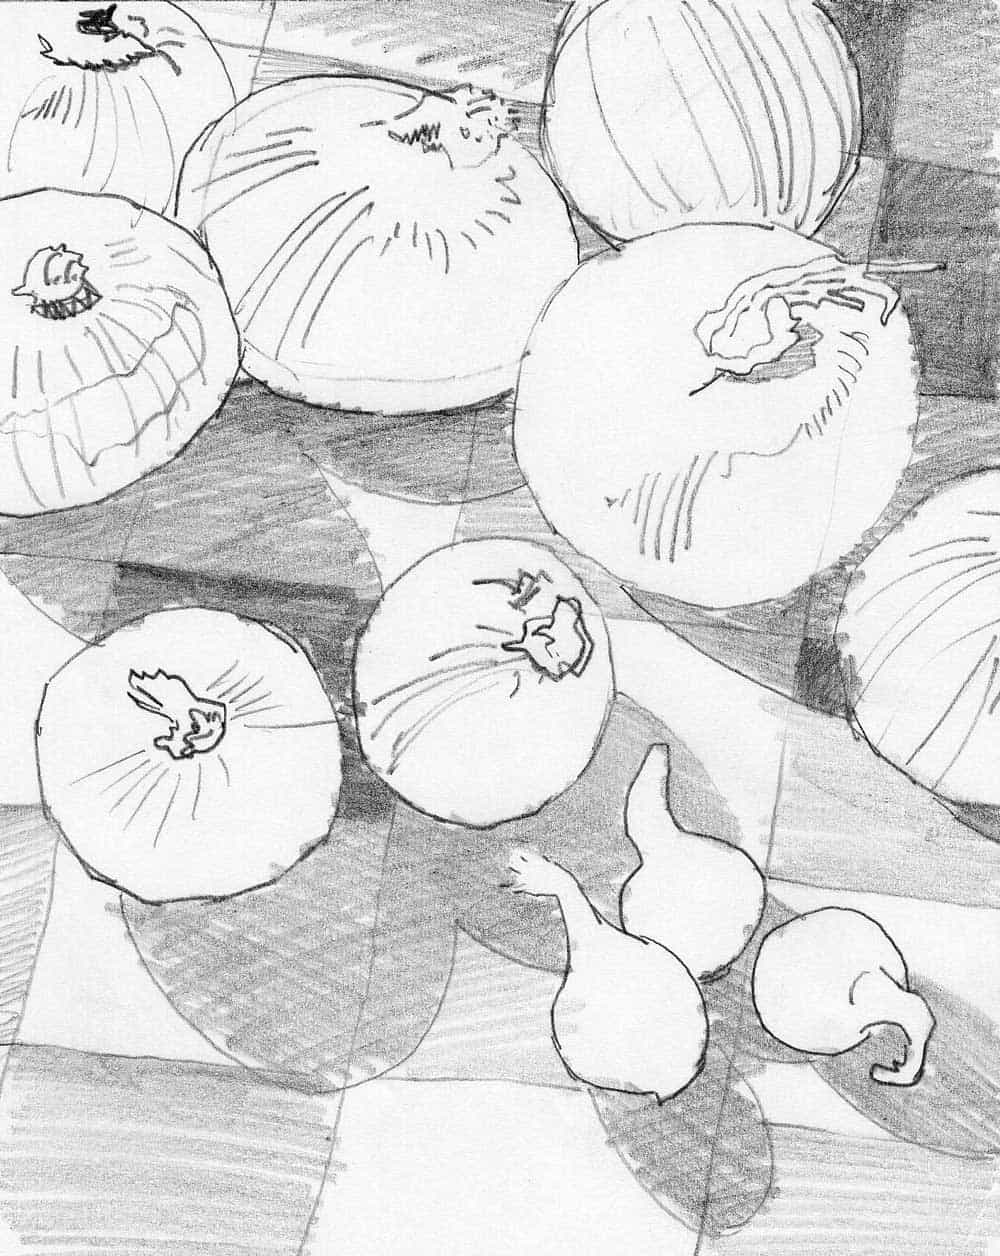 A drawing of onions in the studio. Final cover art for a magazine cover. Brent Watkinson